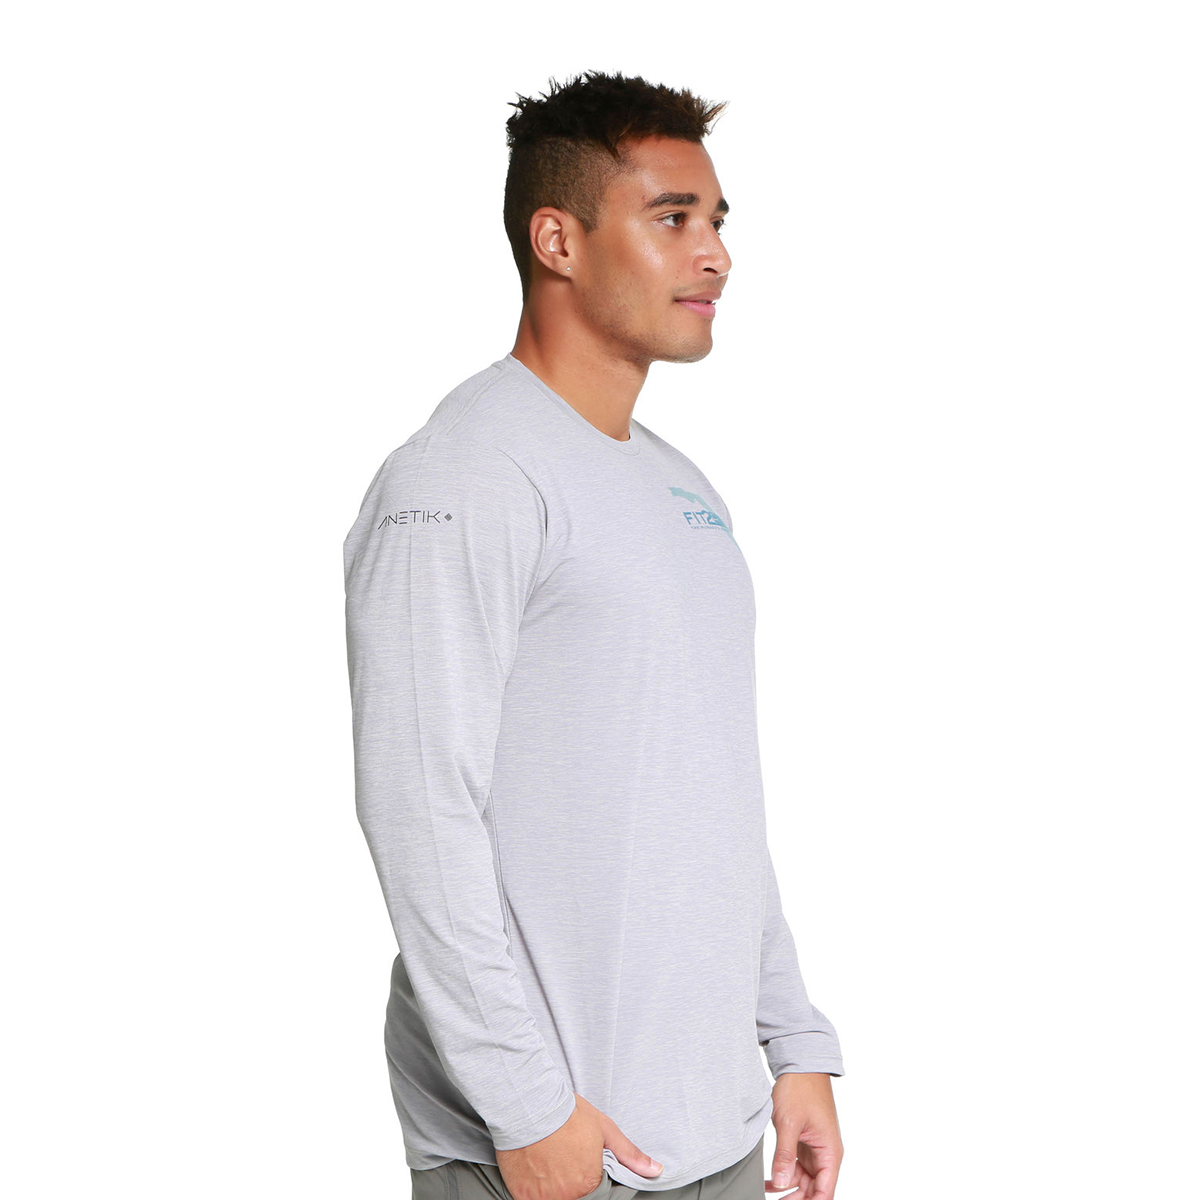 Anetik Low Pro Tech Longsleeve, , large image number null